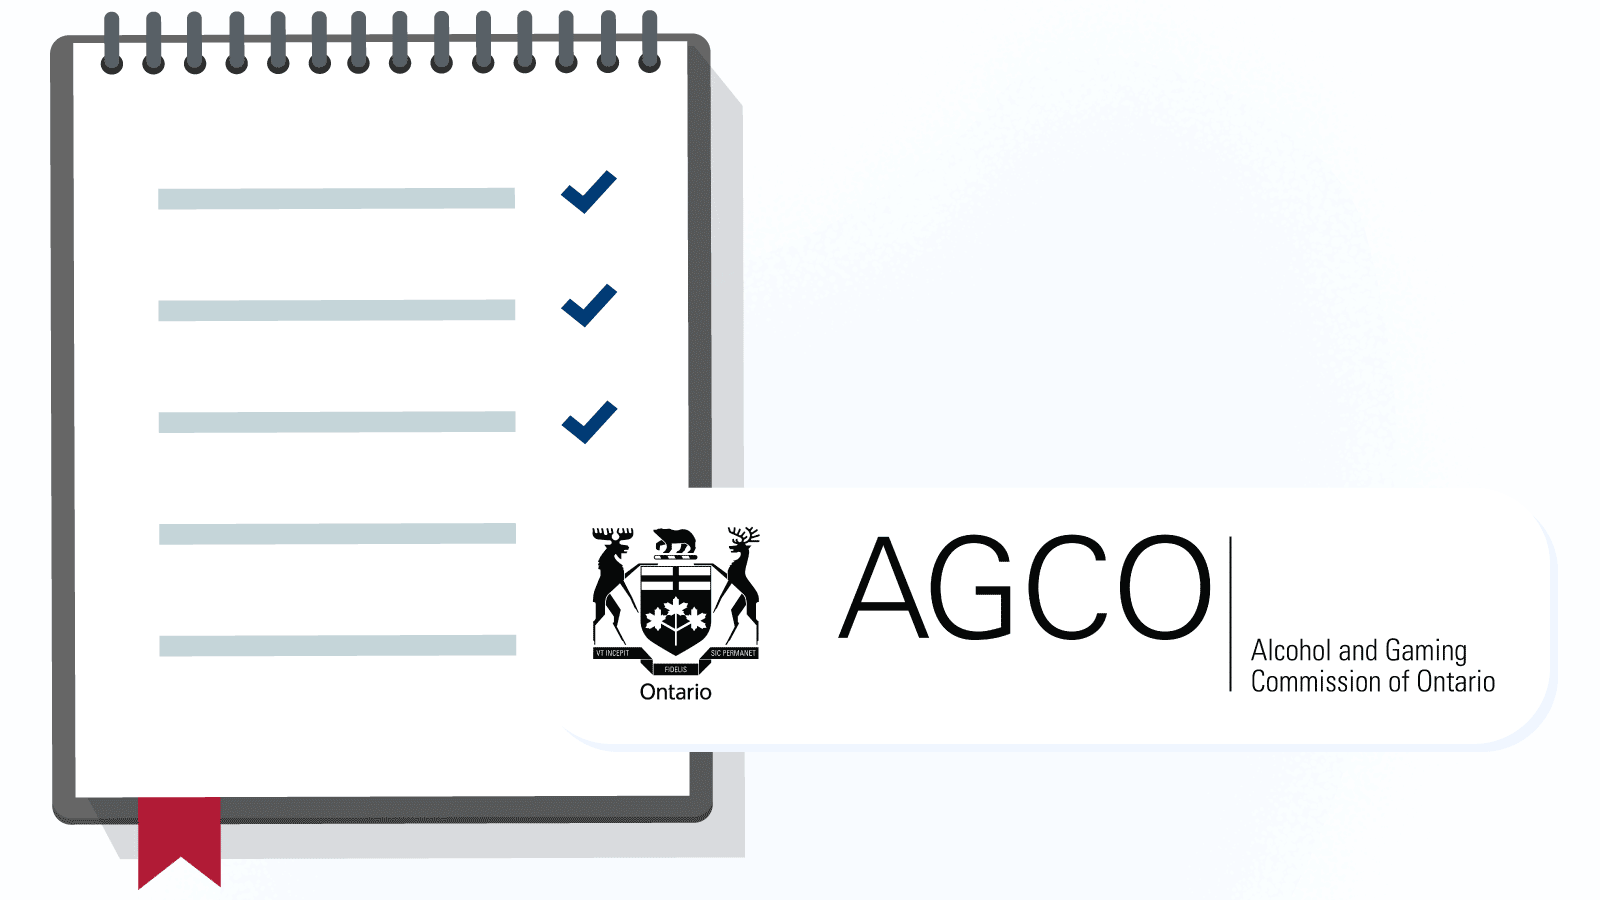 AGCO conditions that apply to Interac casinos in Ontario